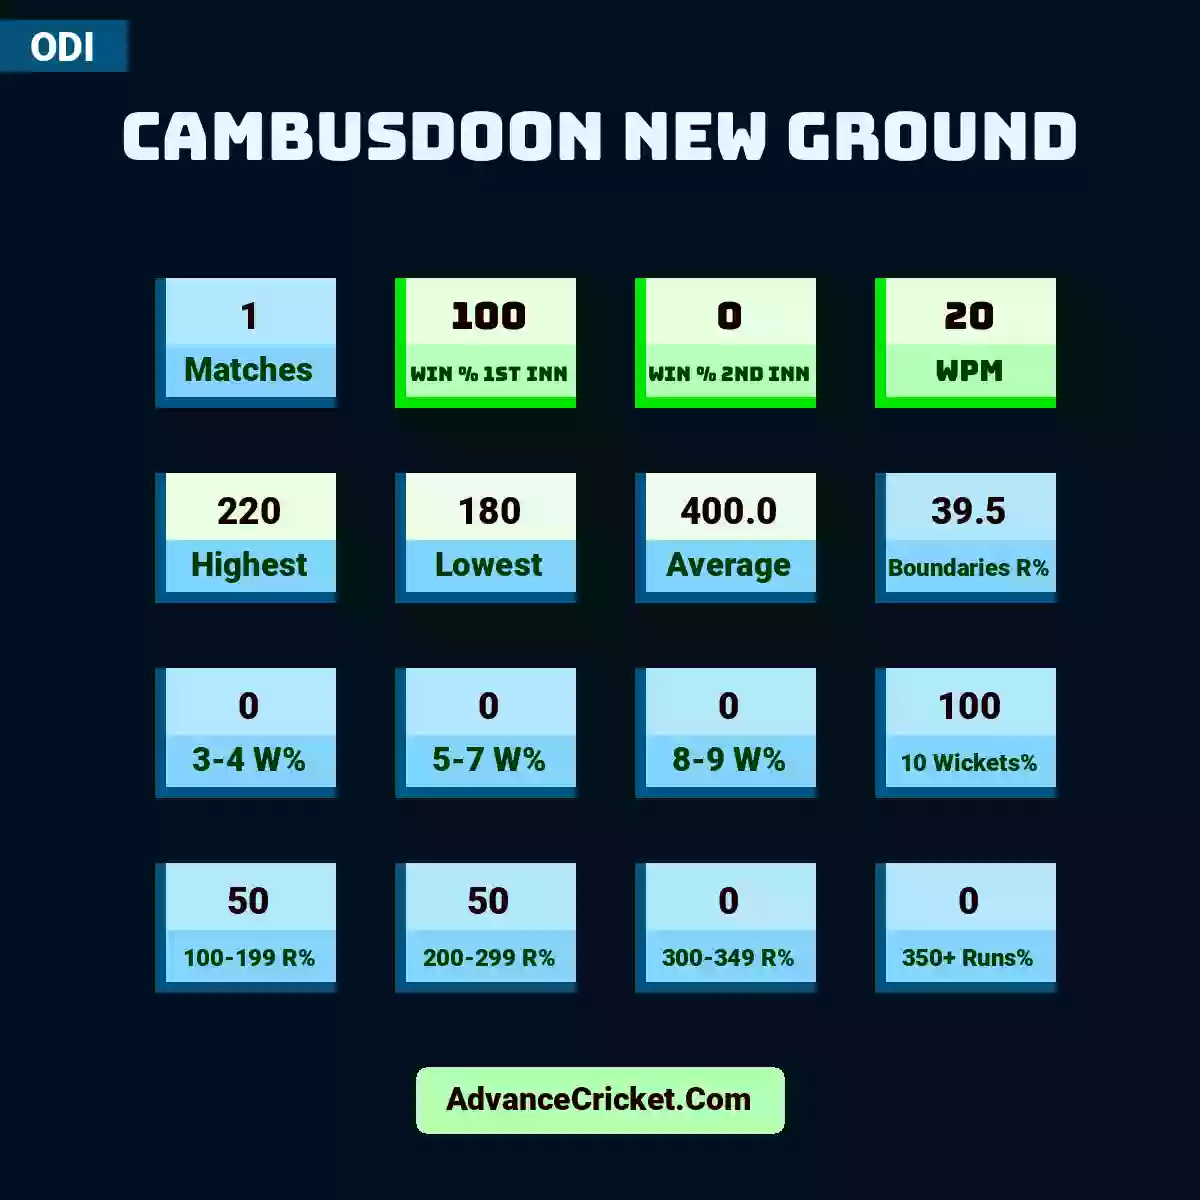 Image showing Cambusdoon New Ground with Matches: 1, Win % 1st Inn: 100, Win % 2nd Inn: 0, WPM: 20, Highest: 220, Lowest: 180, Average: 400.0, Boundaries R%: 39.5, 3-4 W%: 0, 5-7 W%: 0, 8-9 W%: 0, 10 Wickets%: 100, 100-199 R%: 50, 200-299 R%: 50, 300-349 R%: 0, 350+ Runs%: 0.